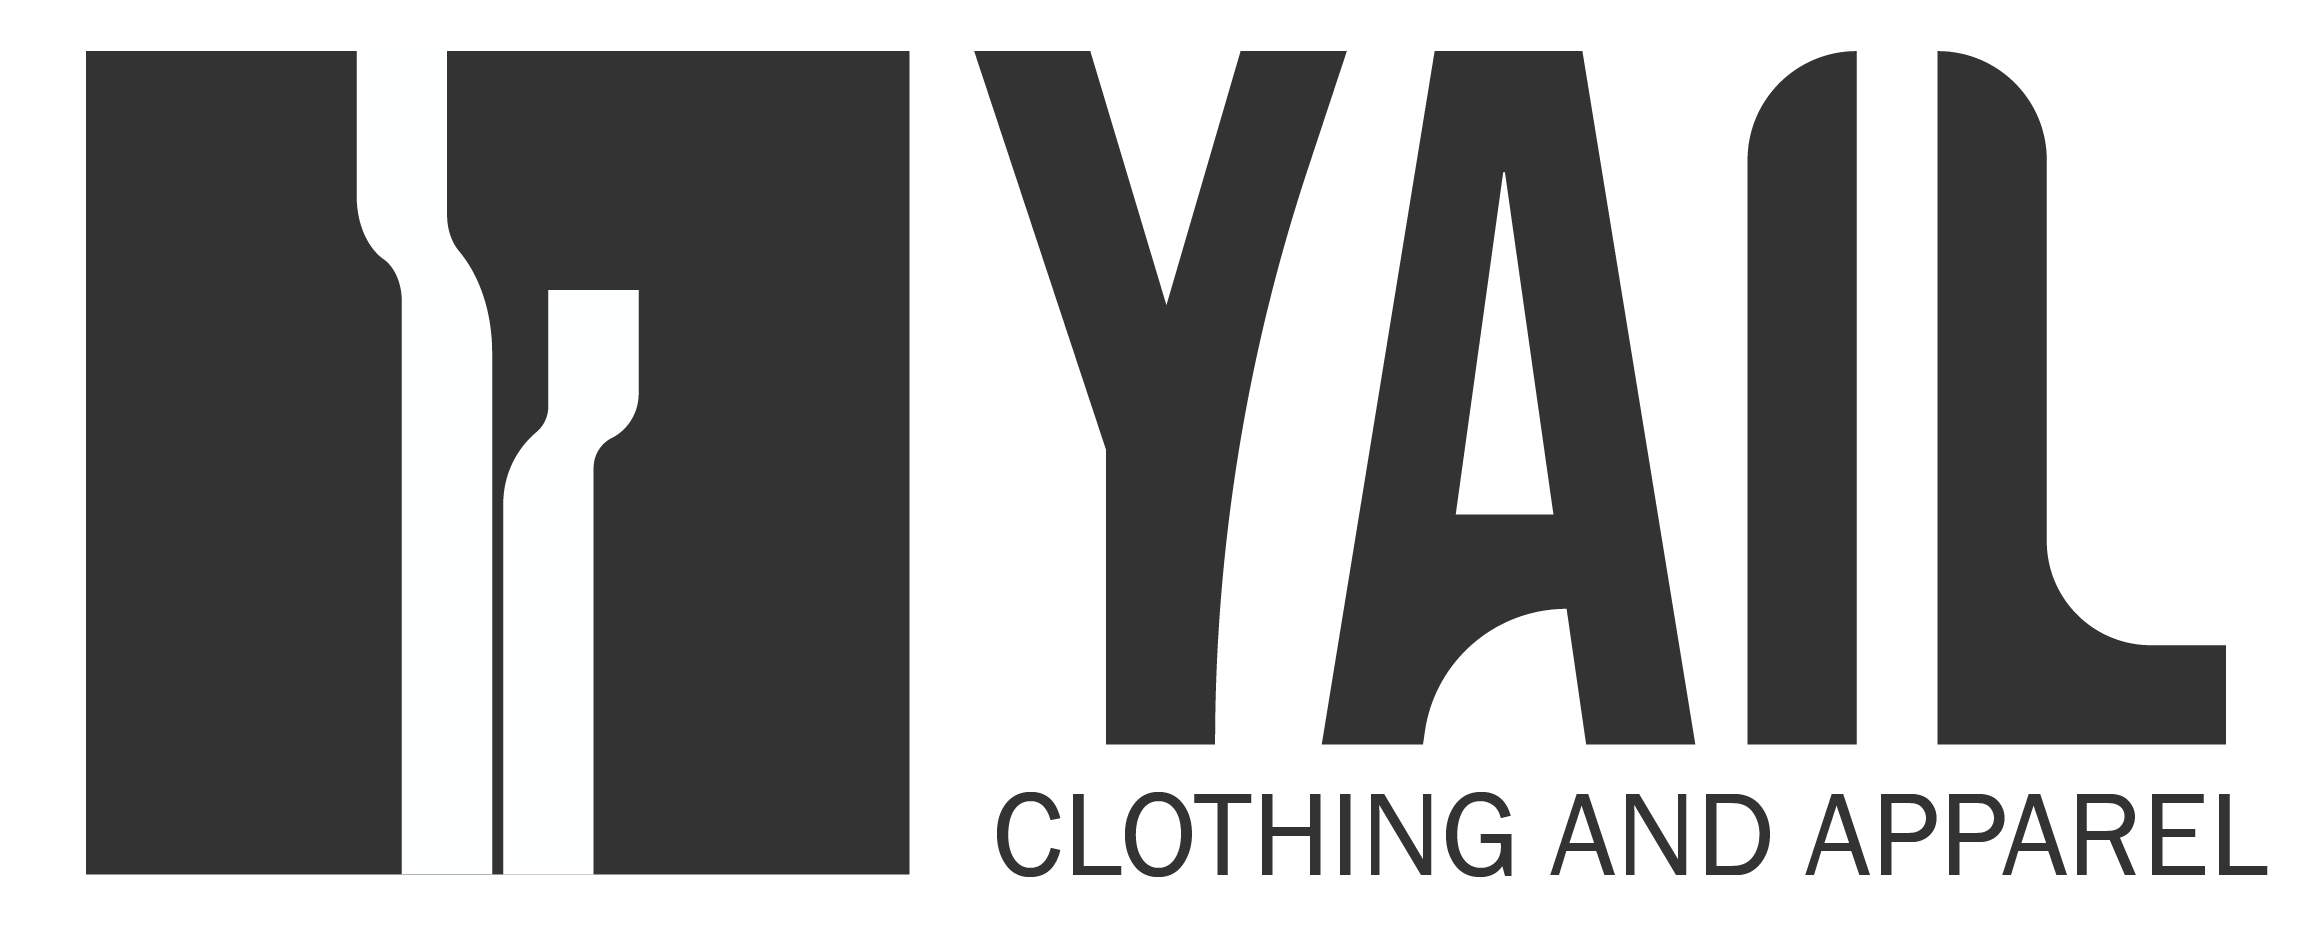 Yail Clothing and Apparel